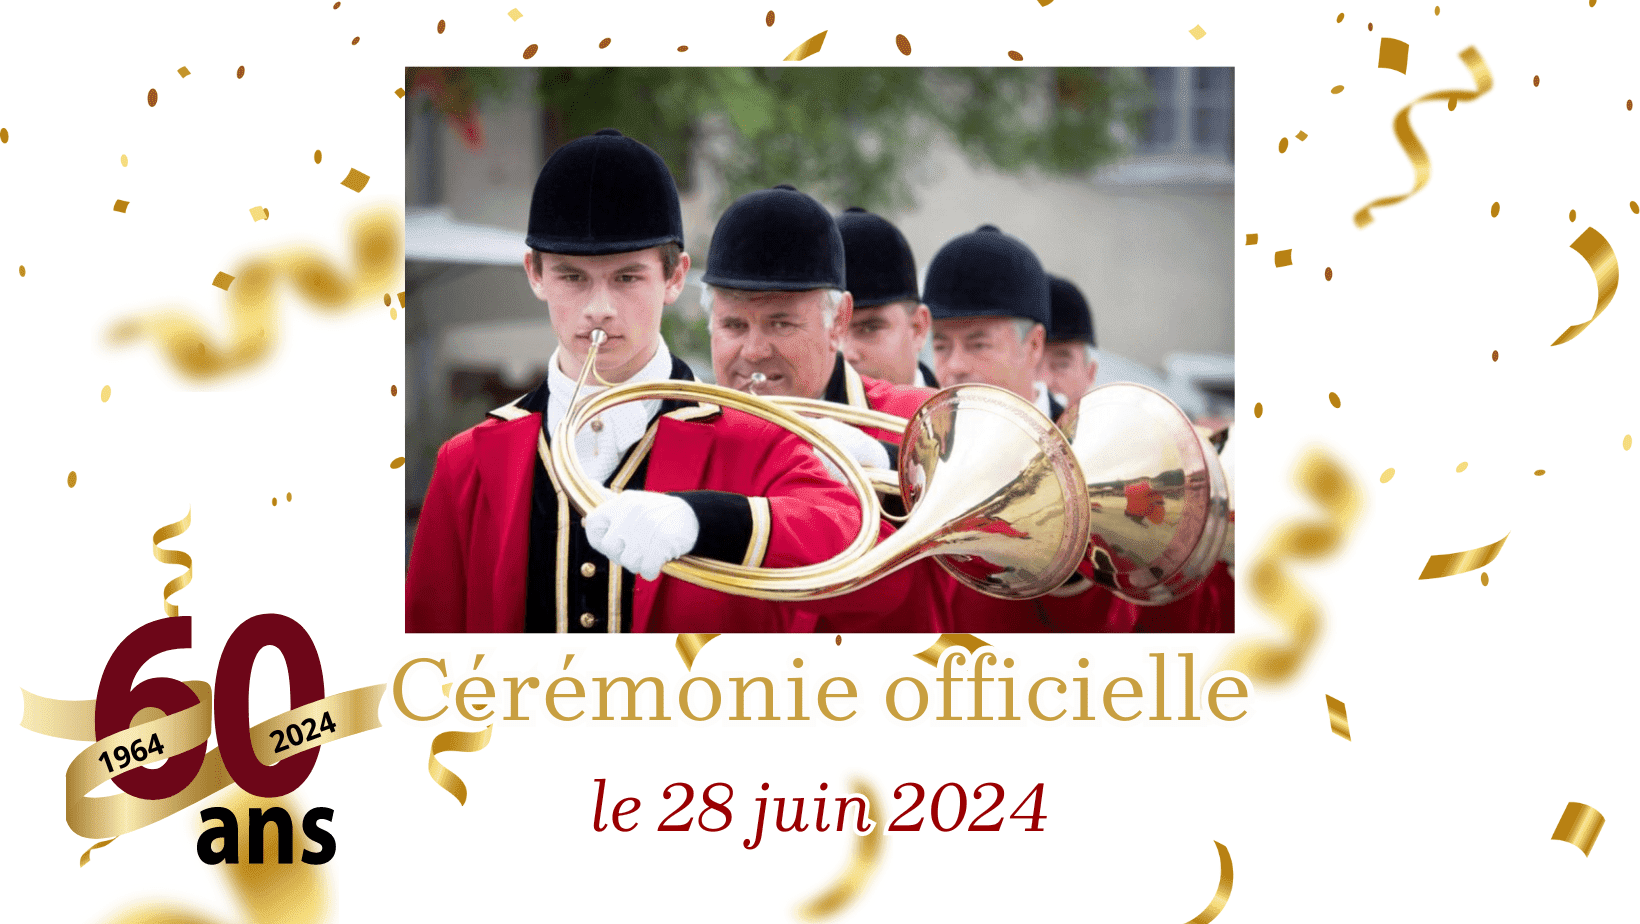 Camping La Garangeoire - Special Announcement: Official 60th Anniversary Ceremony on June 28th!